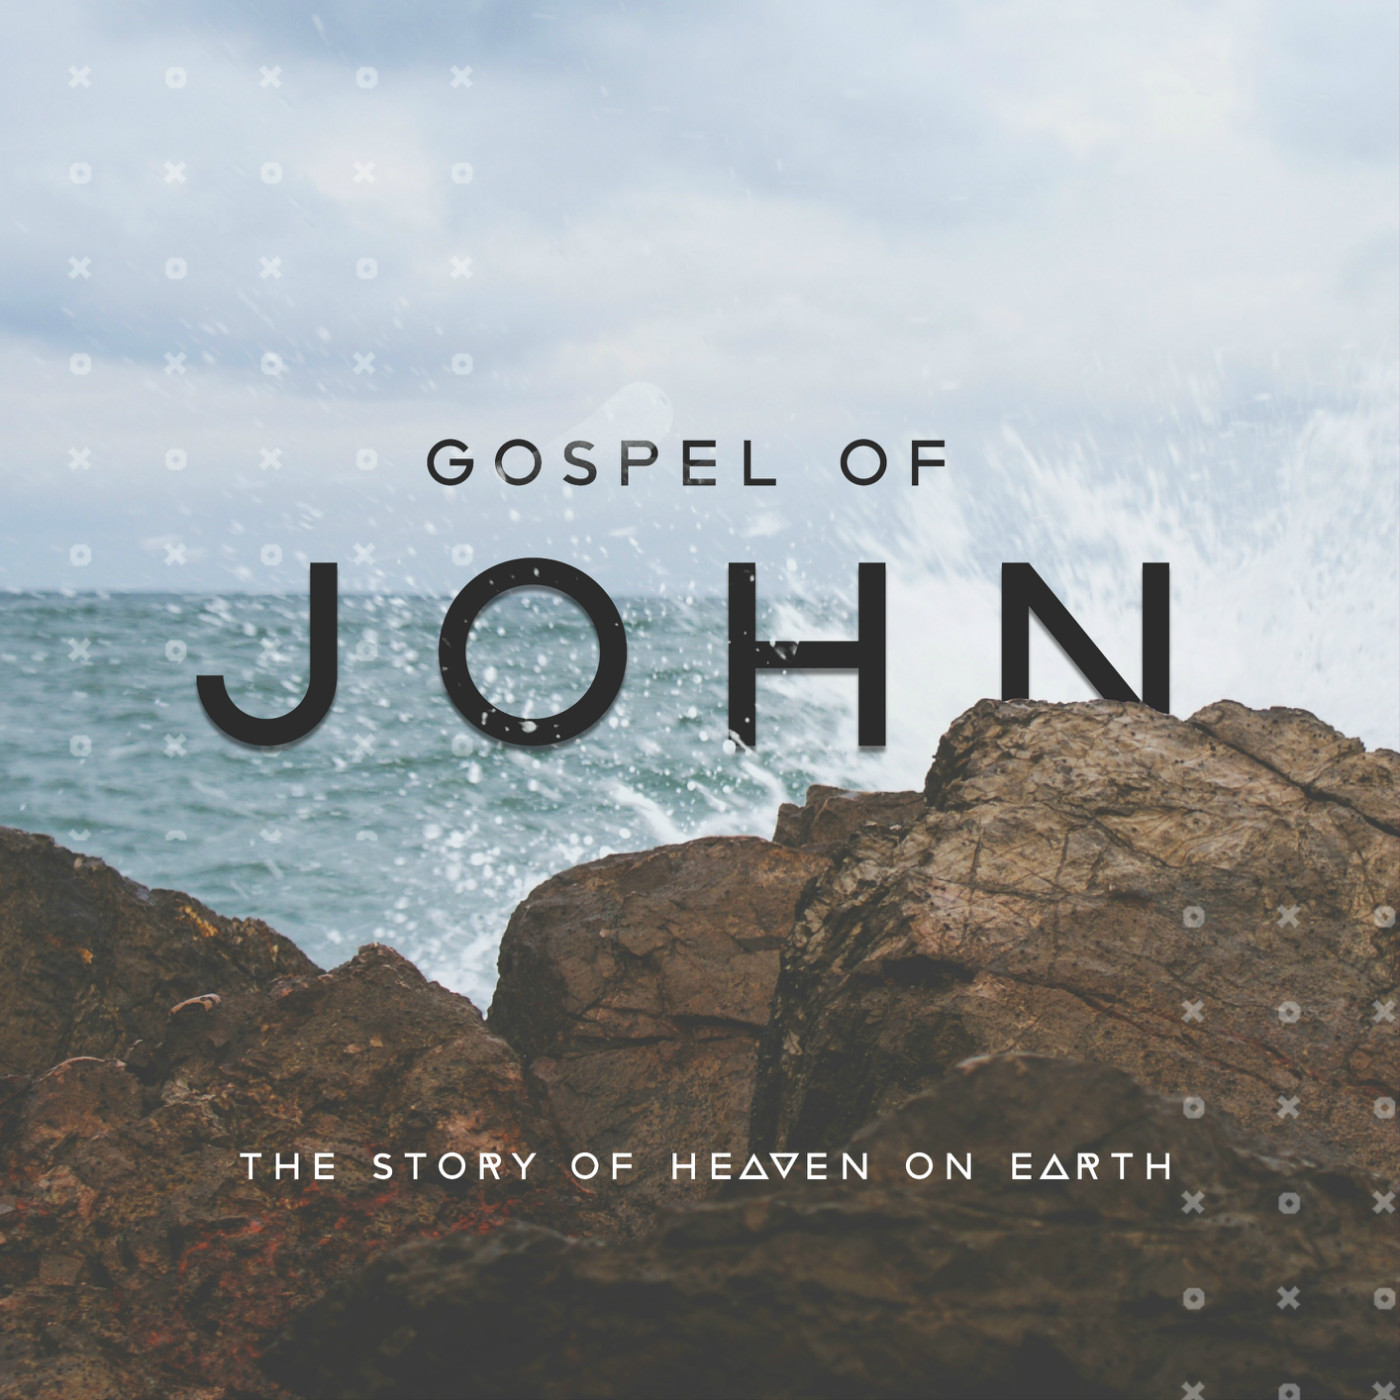 The Gospel of John Series: ”A welcome and a warning” Part 15